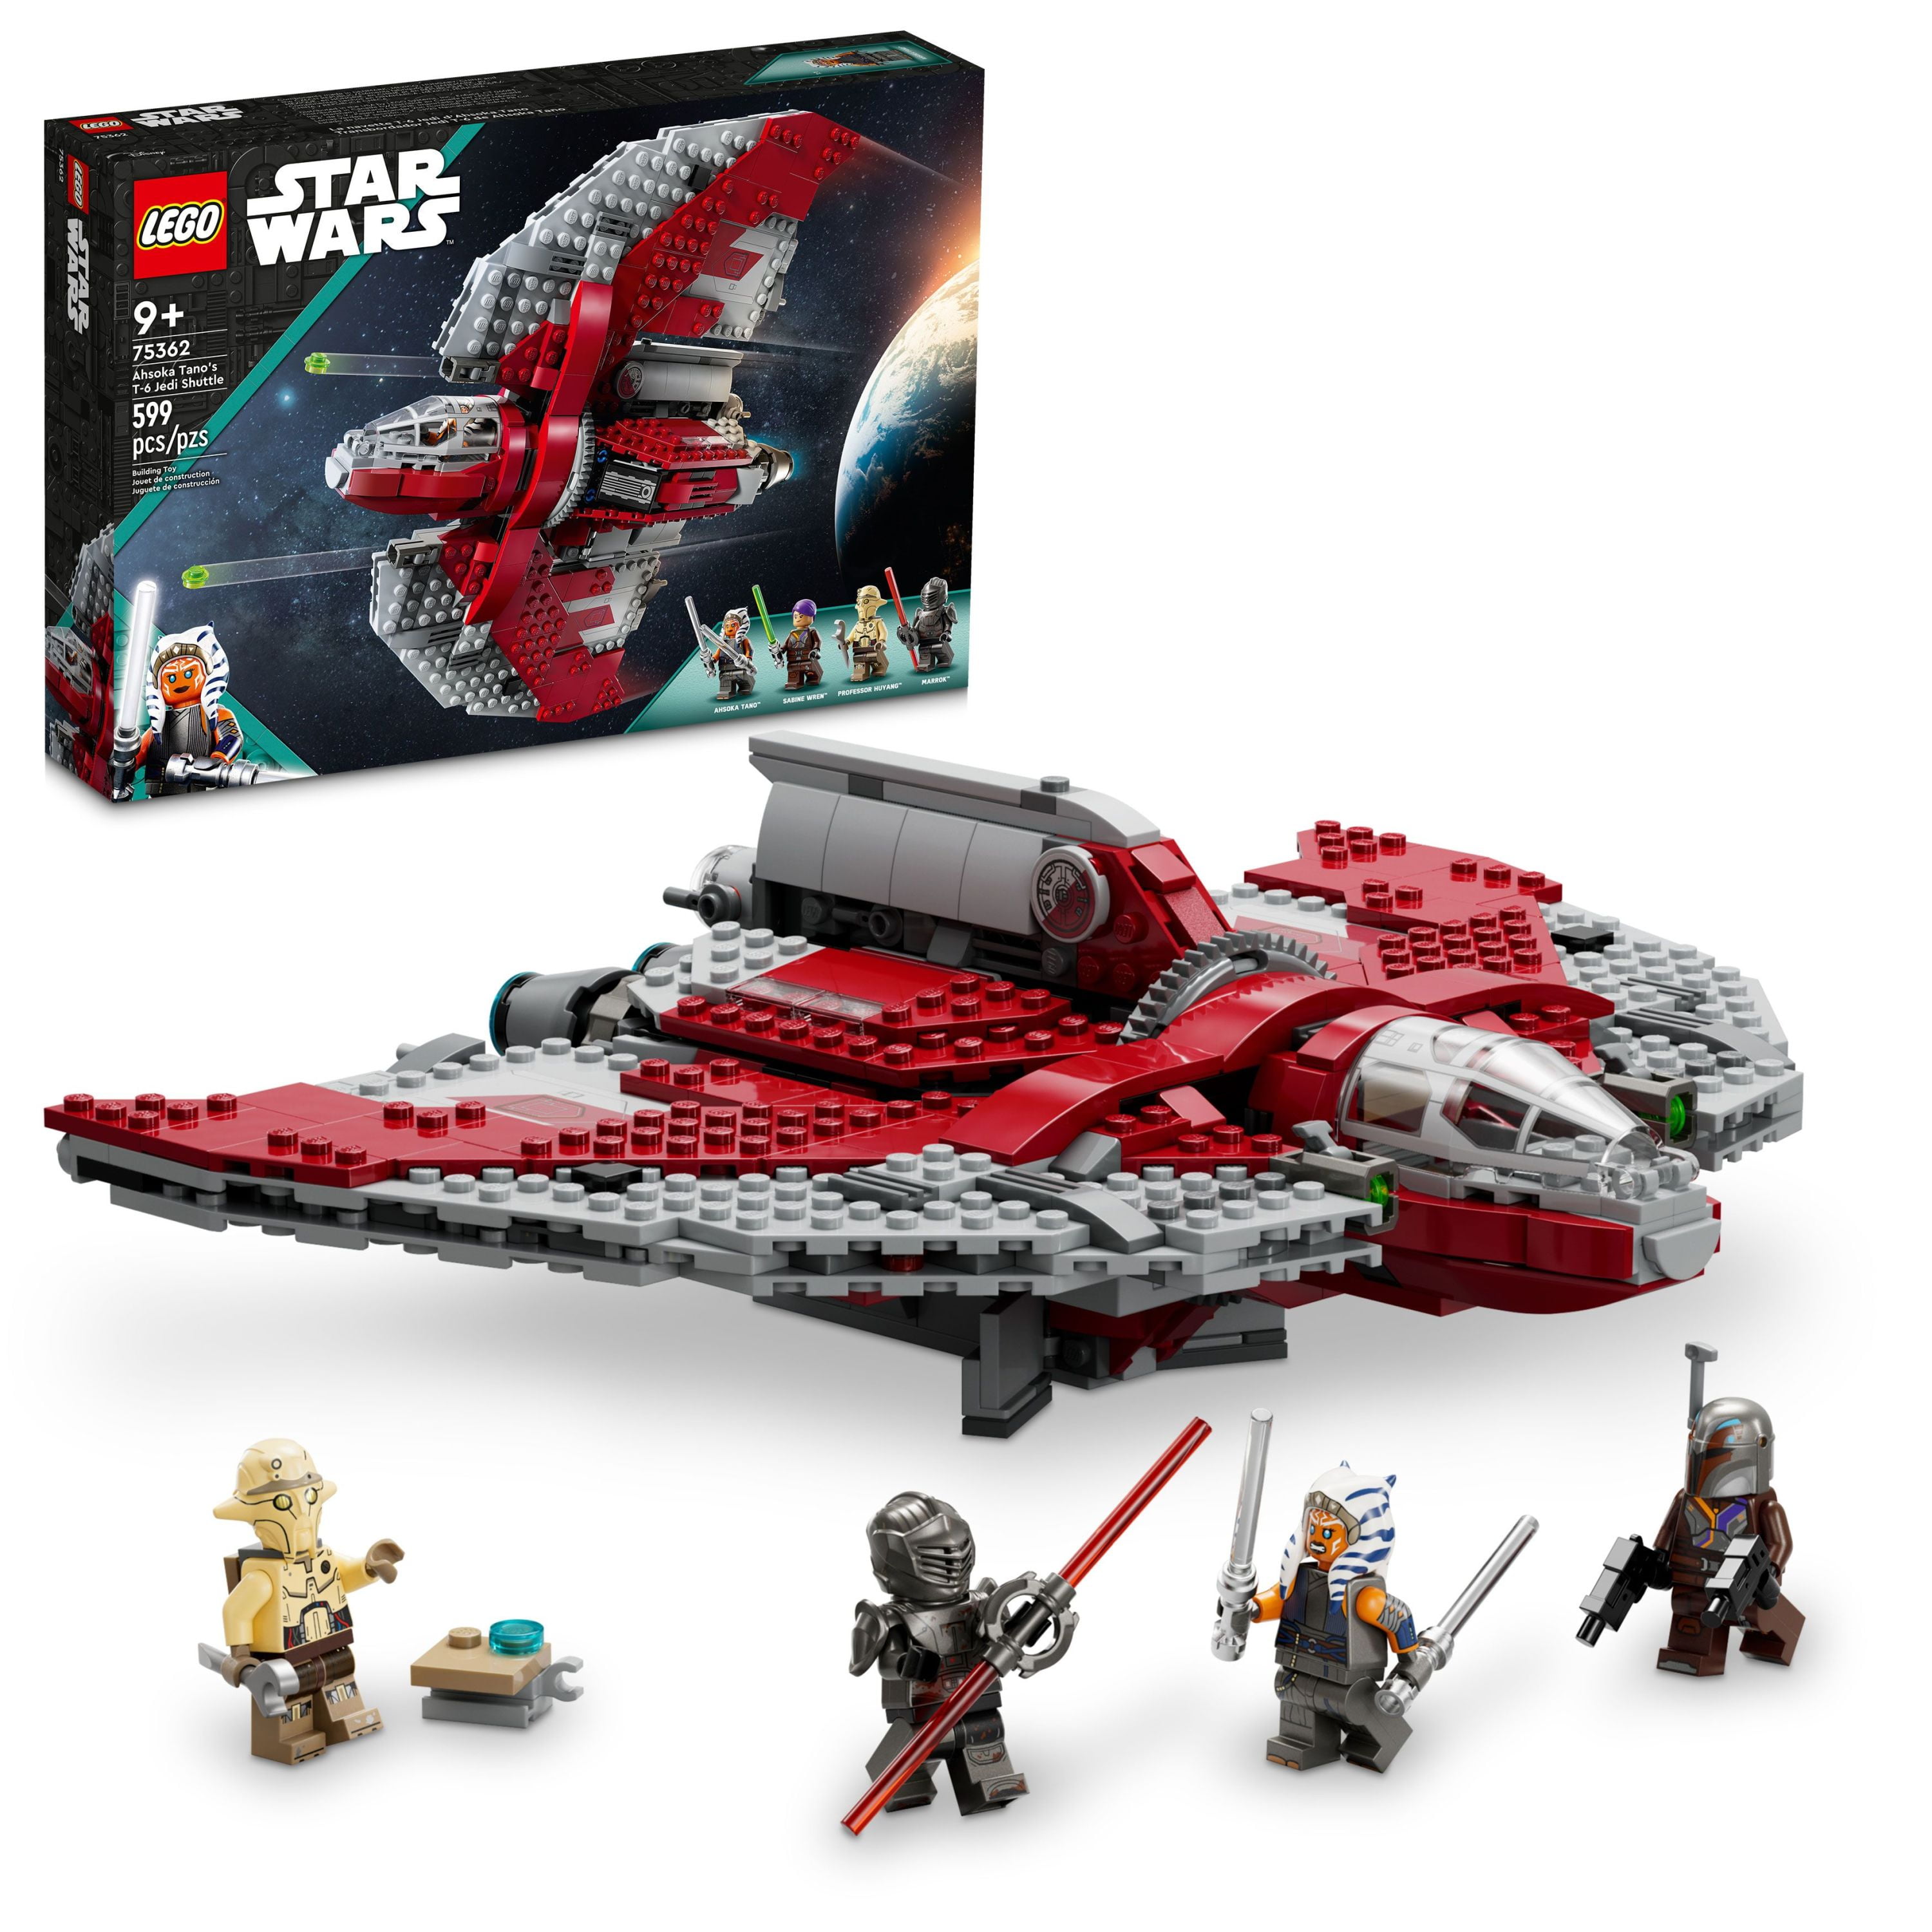 The LEGO Star Wars: The Clone Wars UCS sets fans need next